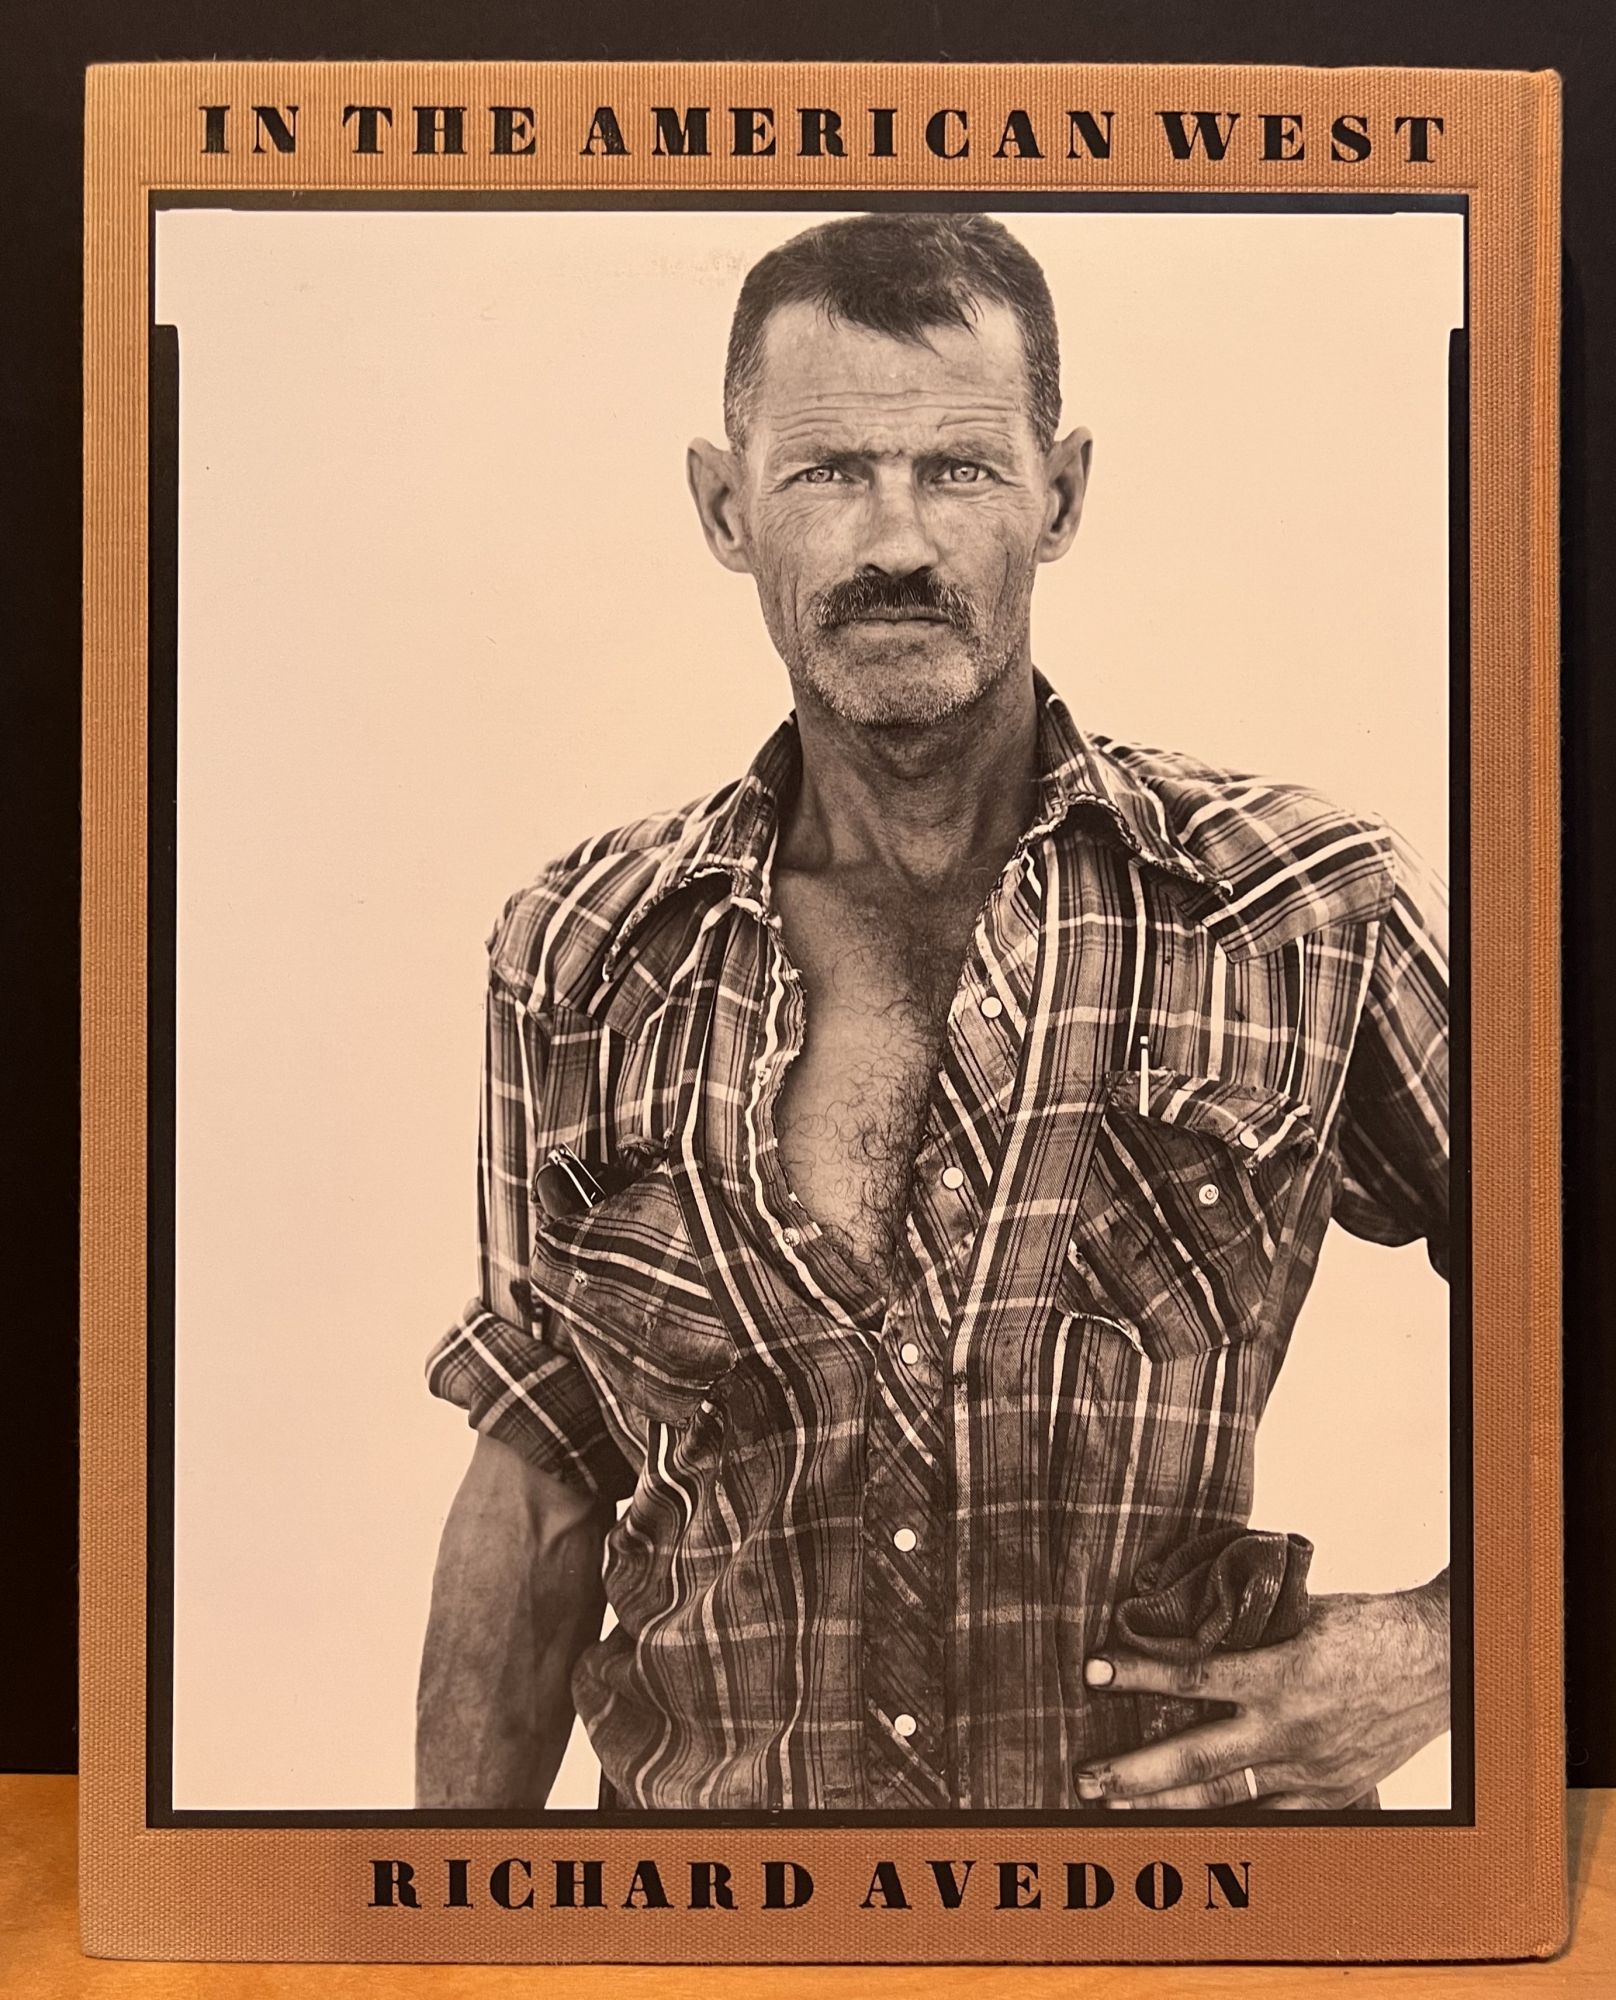 In the American West 1979 - 1984 by Richard Avedon on J. Michaels Books